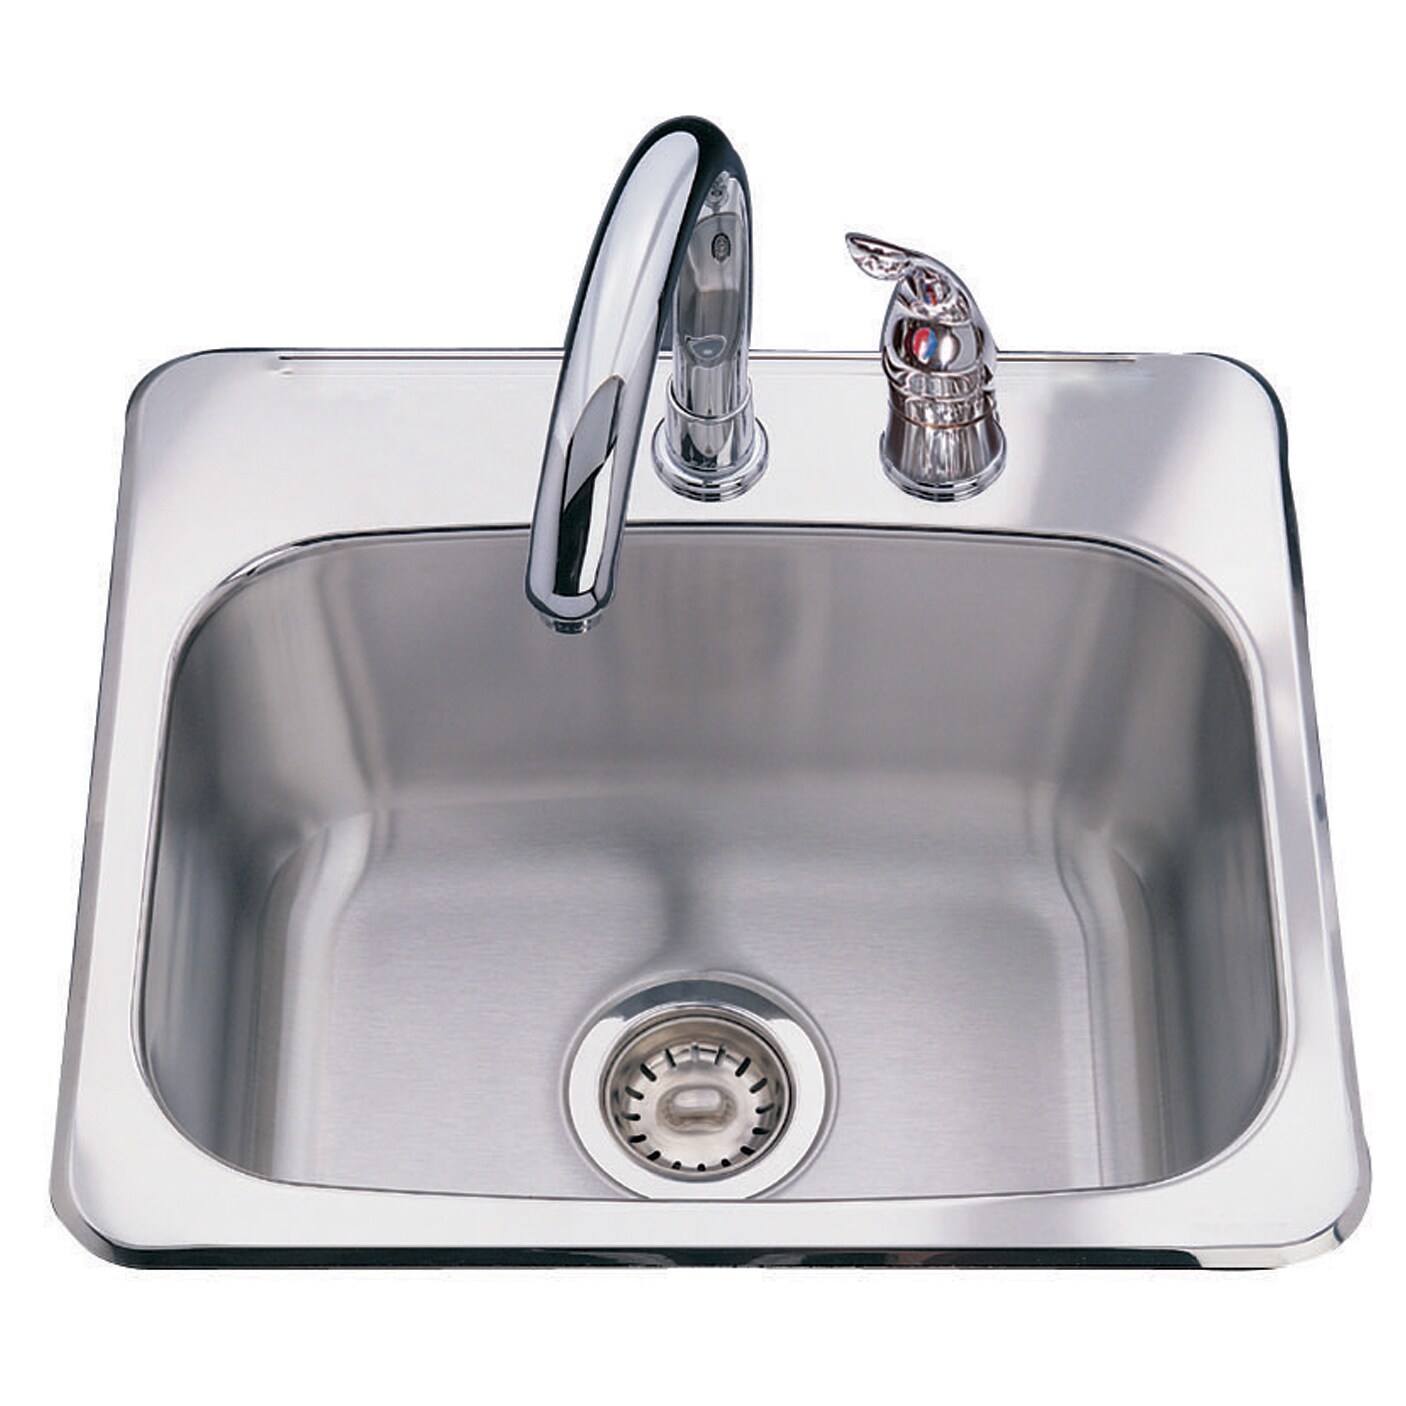 Details About Franke Dual Mount 8 Inch Deep Stainless Steel Bar Sink Extra Large